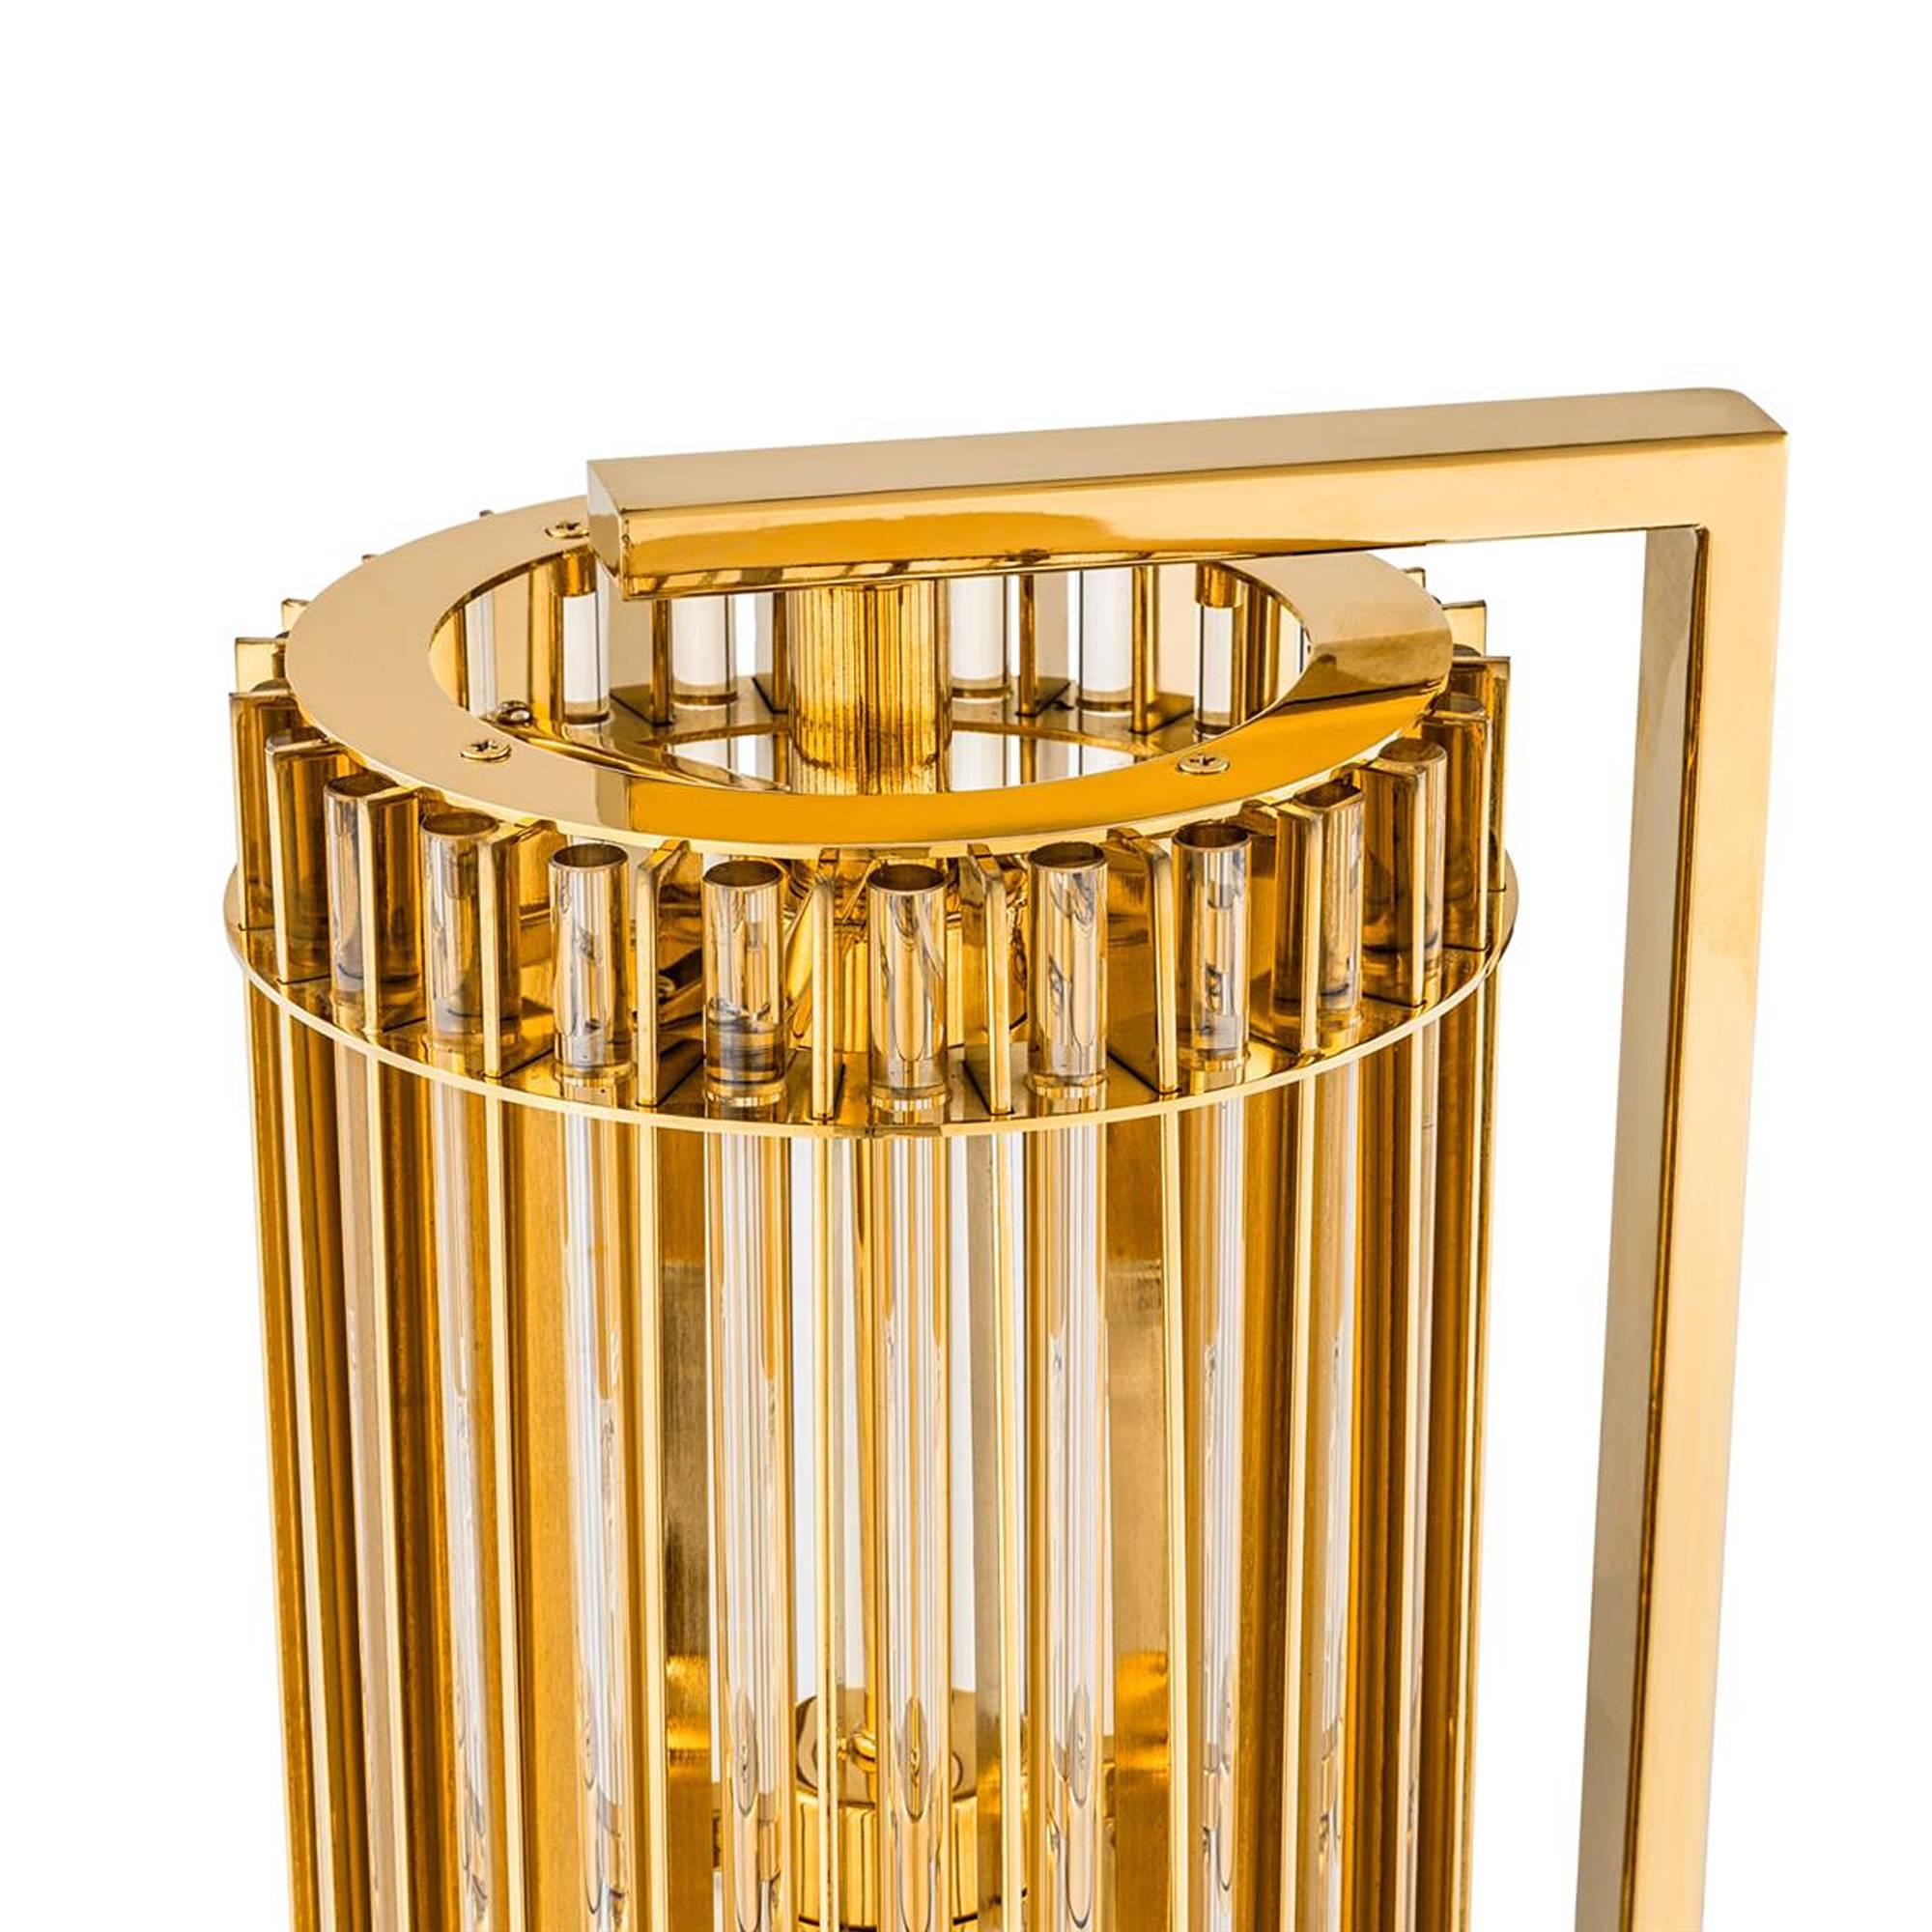 Polished Claudia Table Lamp in Nickel Gold Finish and Glass